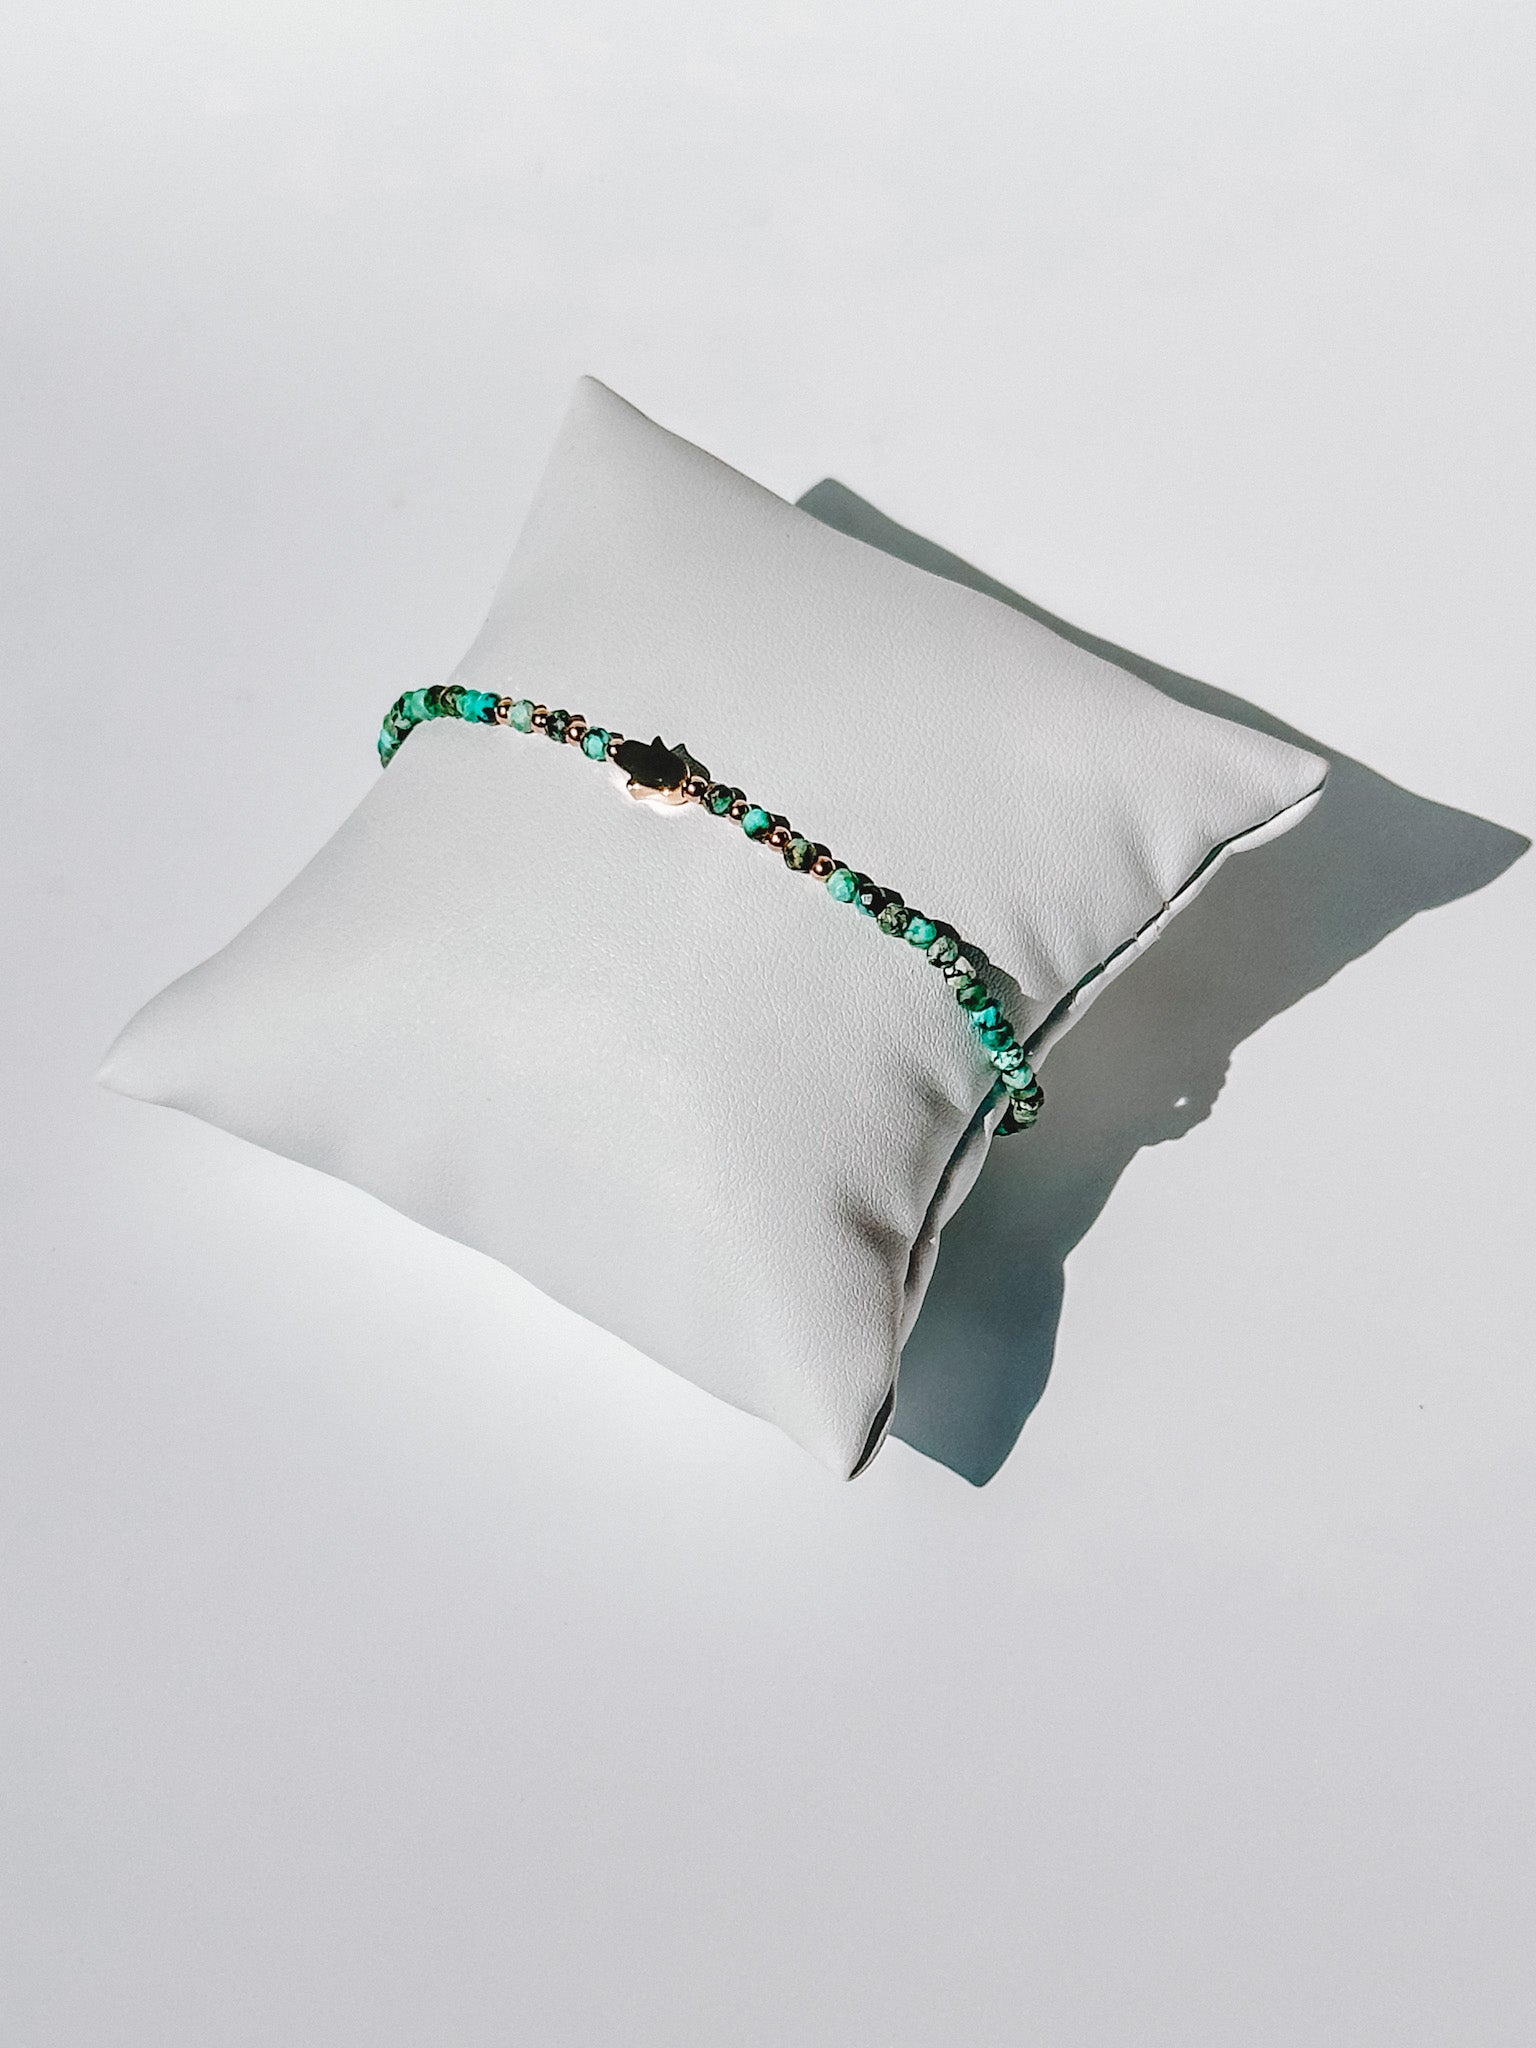 African Turquoise Bracelet